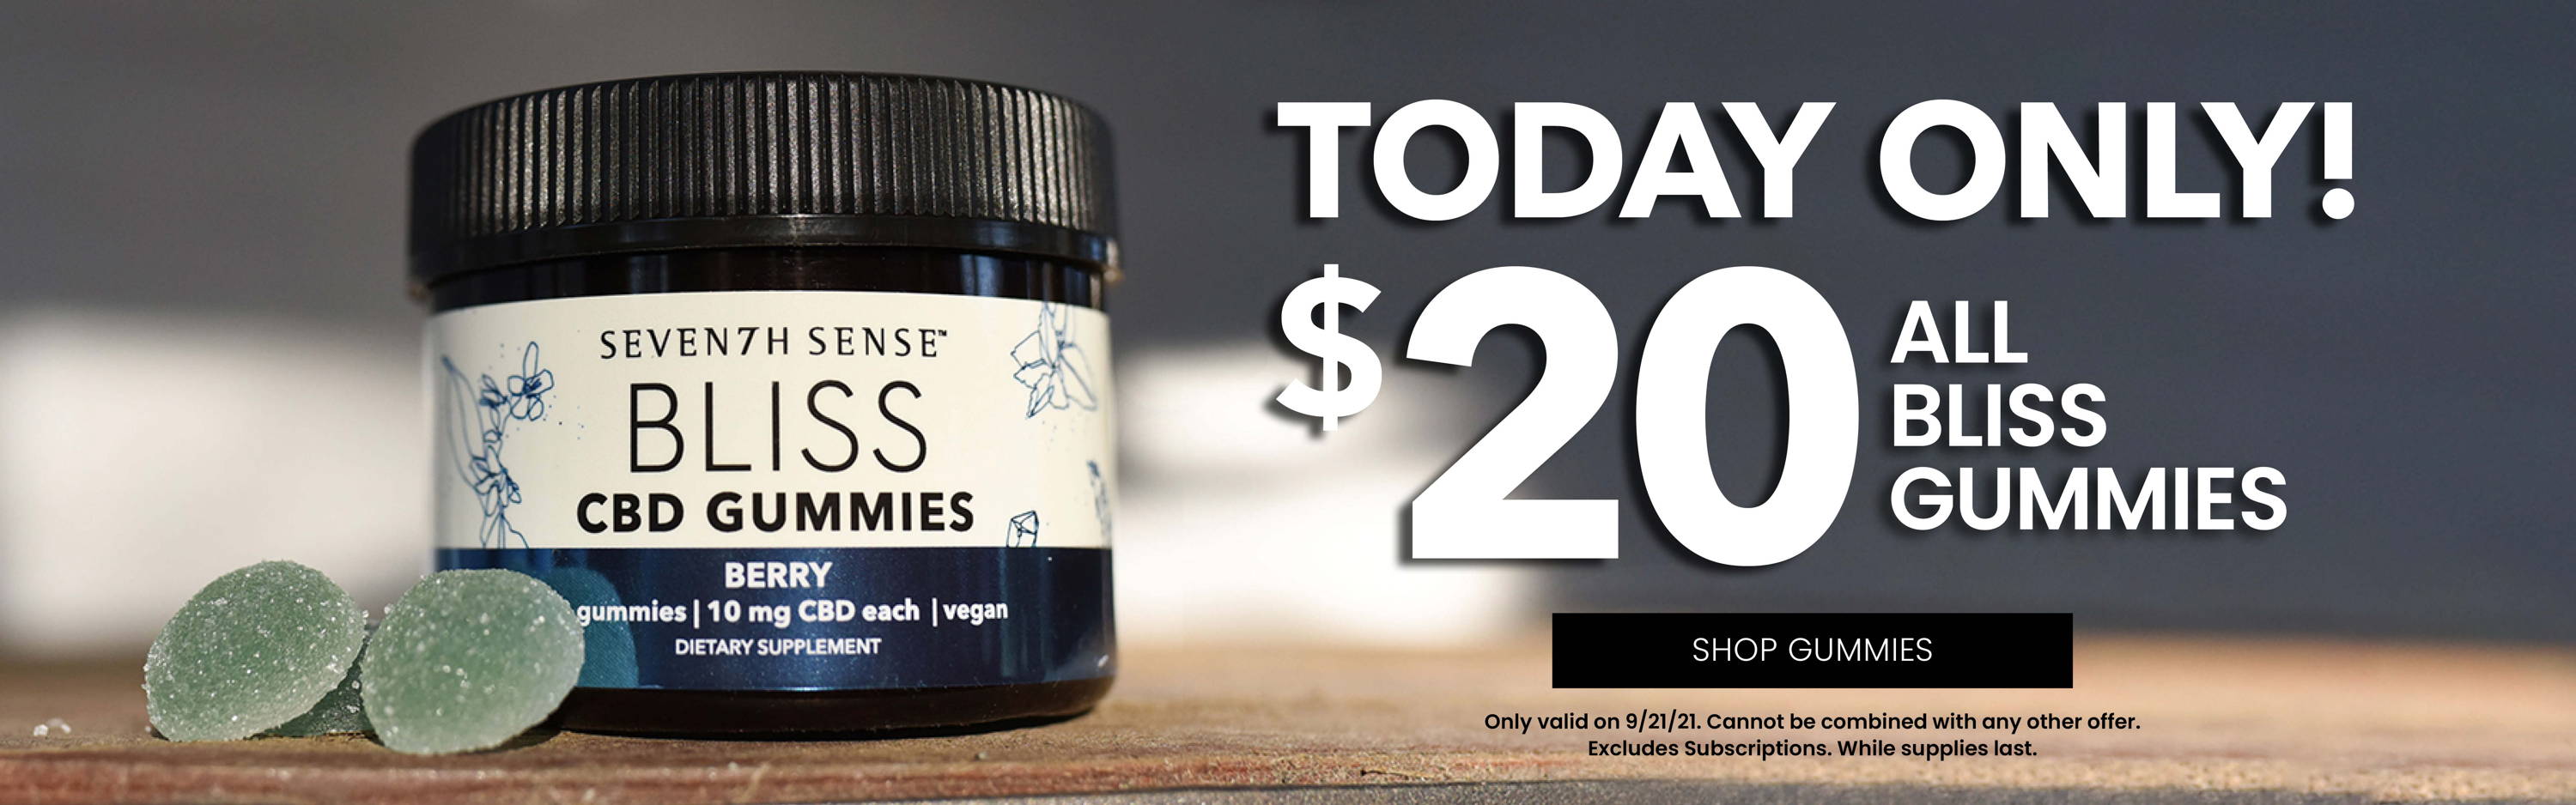 Today Only! $20 All Bliss Gummies. Only valid 9/21/21. Excludes subscriptions.